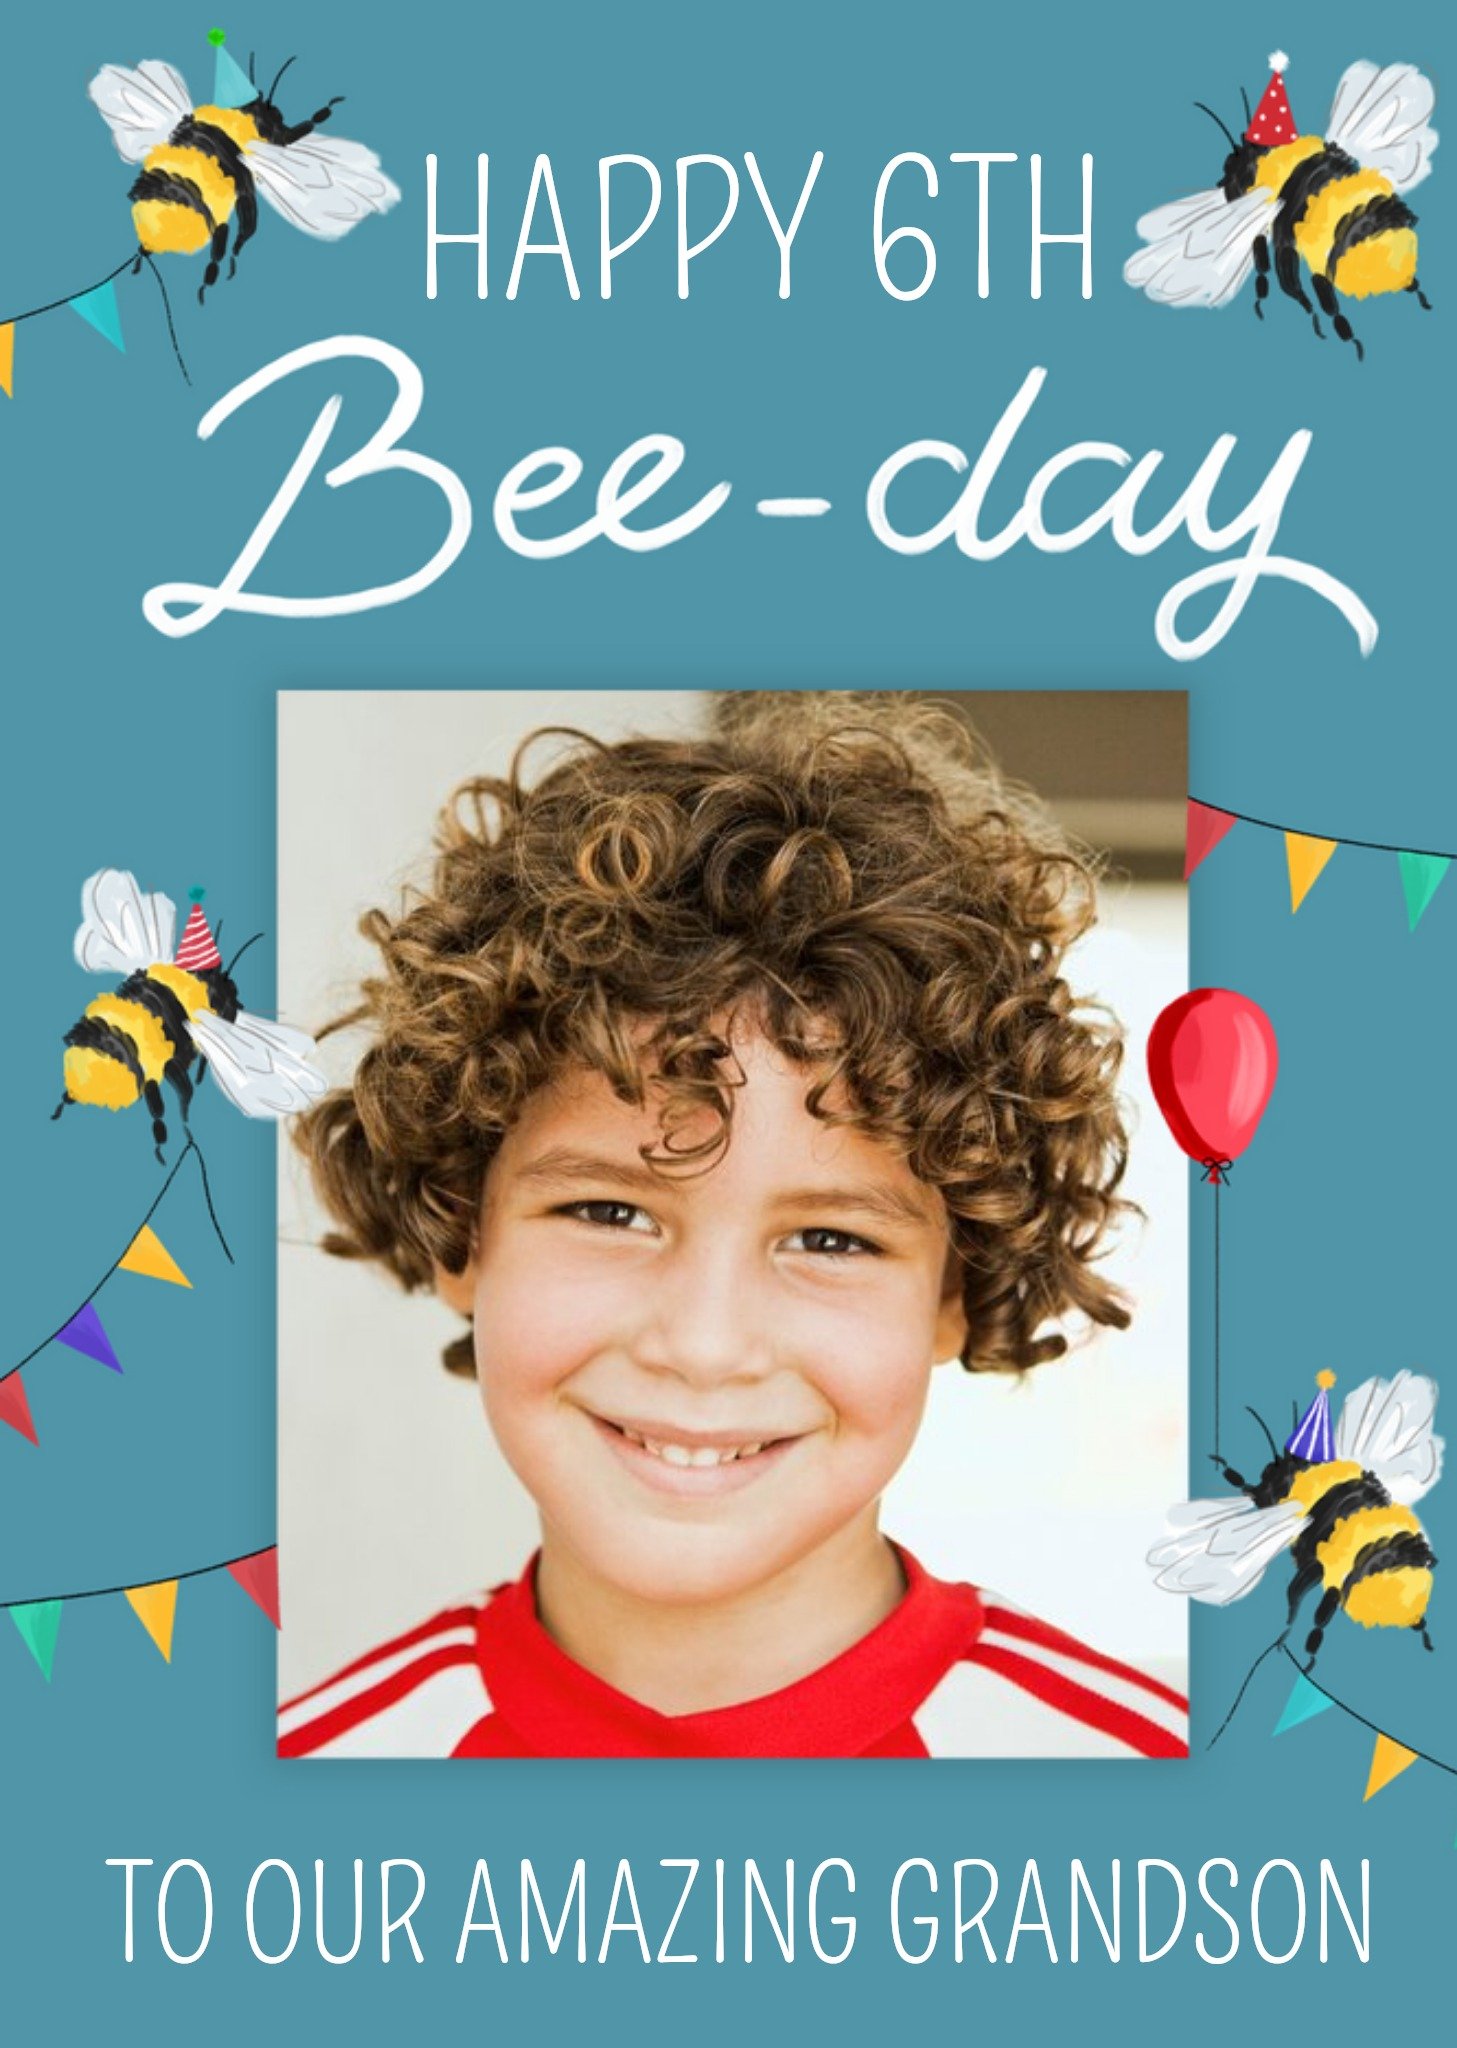 Making Meadows Okey Dokey Illustrated Bees Grandson 6th Birthday Photo Upload Card, Large